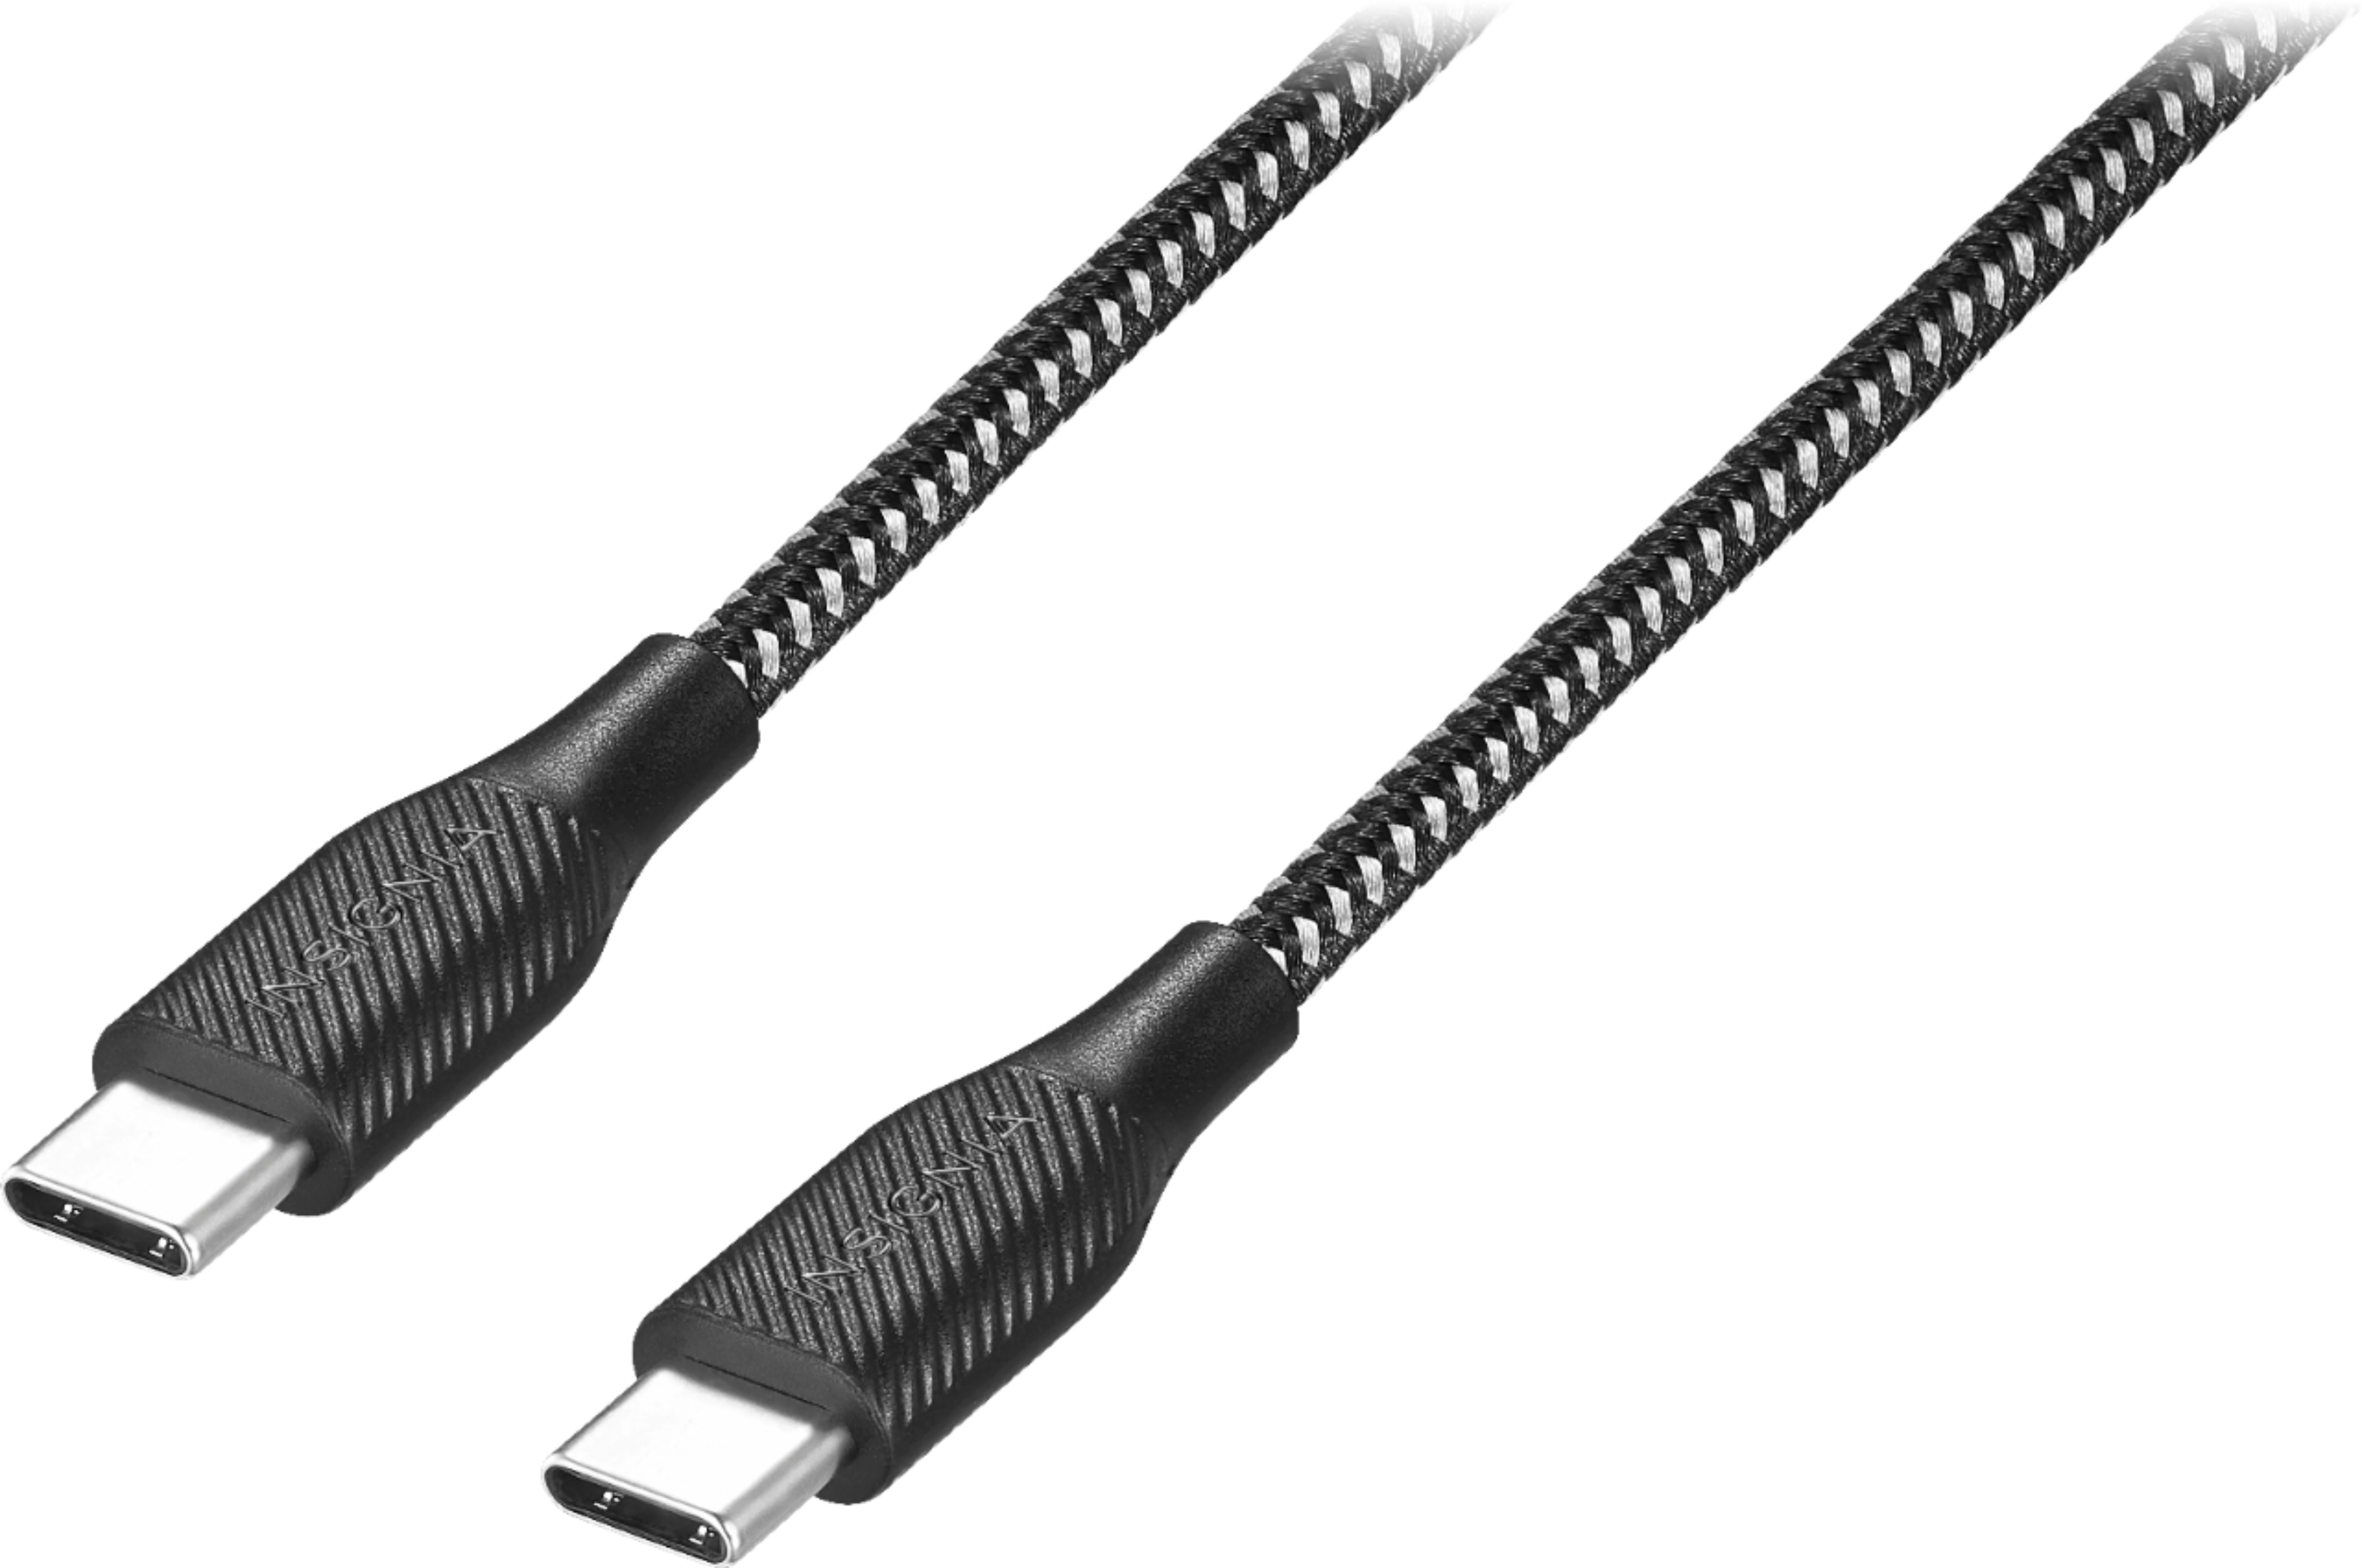 USB Type C Cable with Data/Charge Switch [1 meter long] : ID 4696